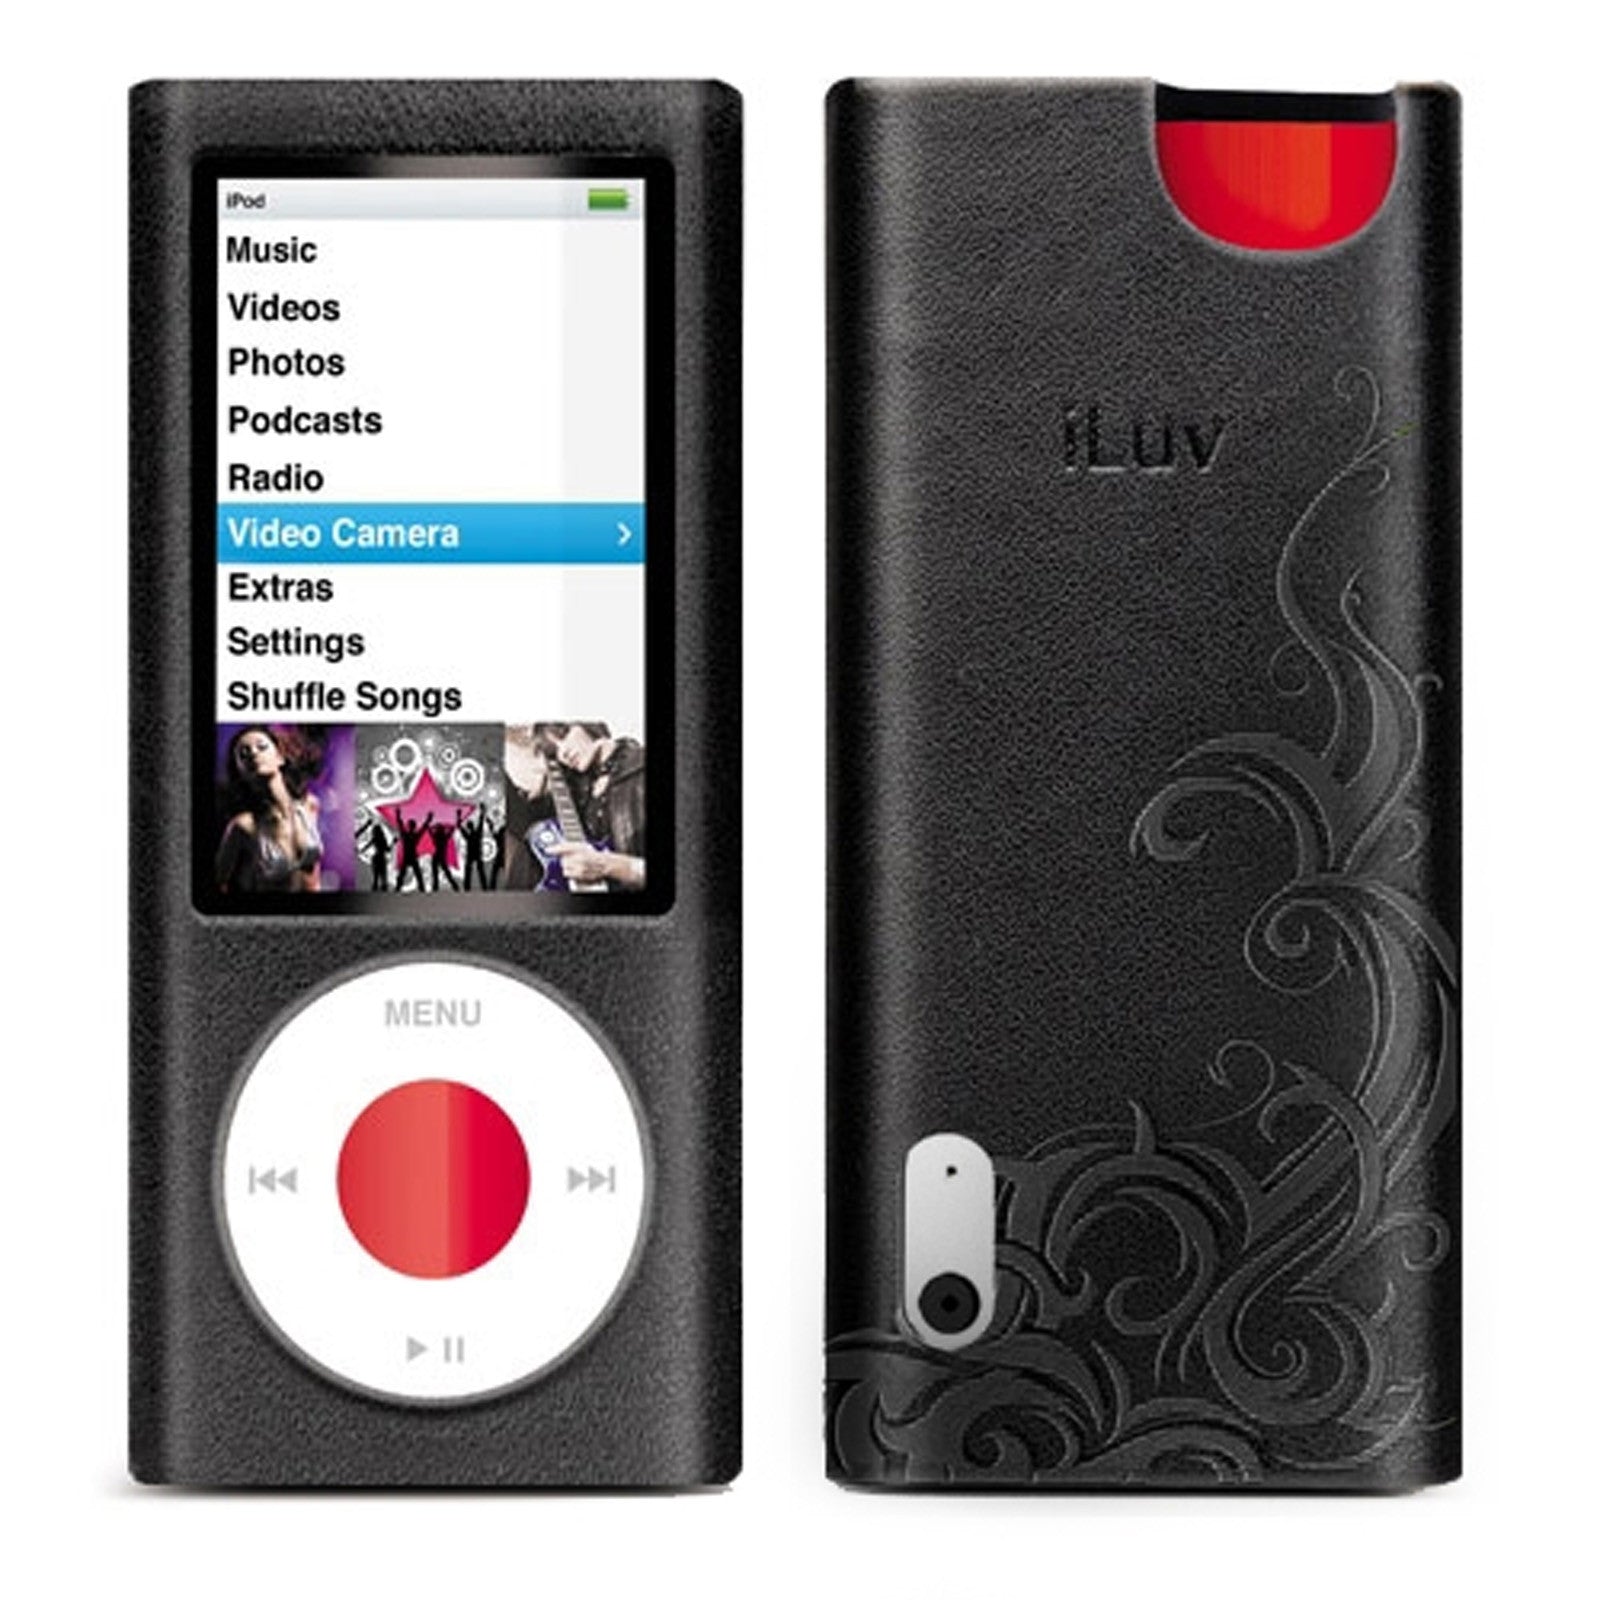 Leather Case with Flame Design for IPOD Nano 5th Generation Case